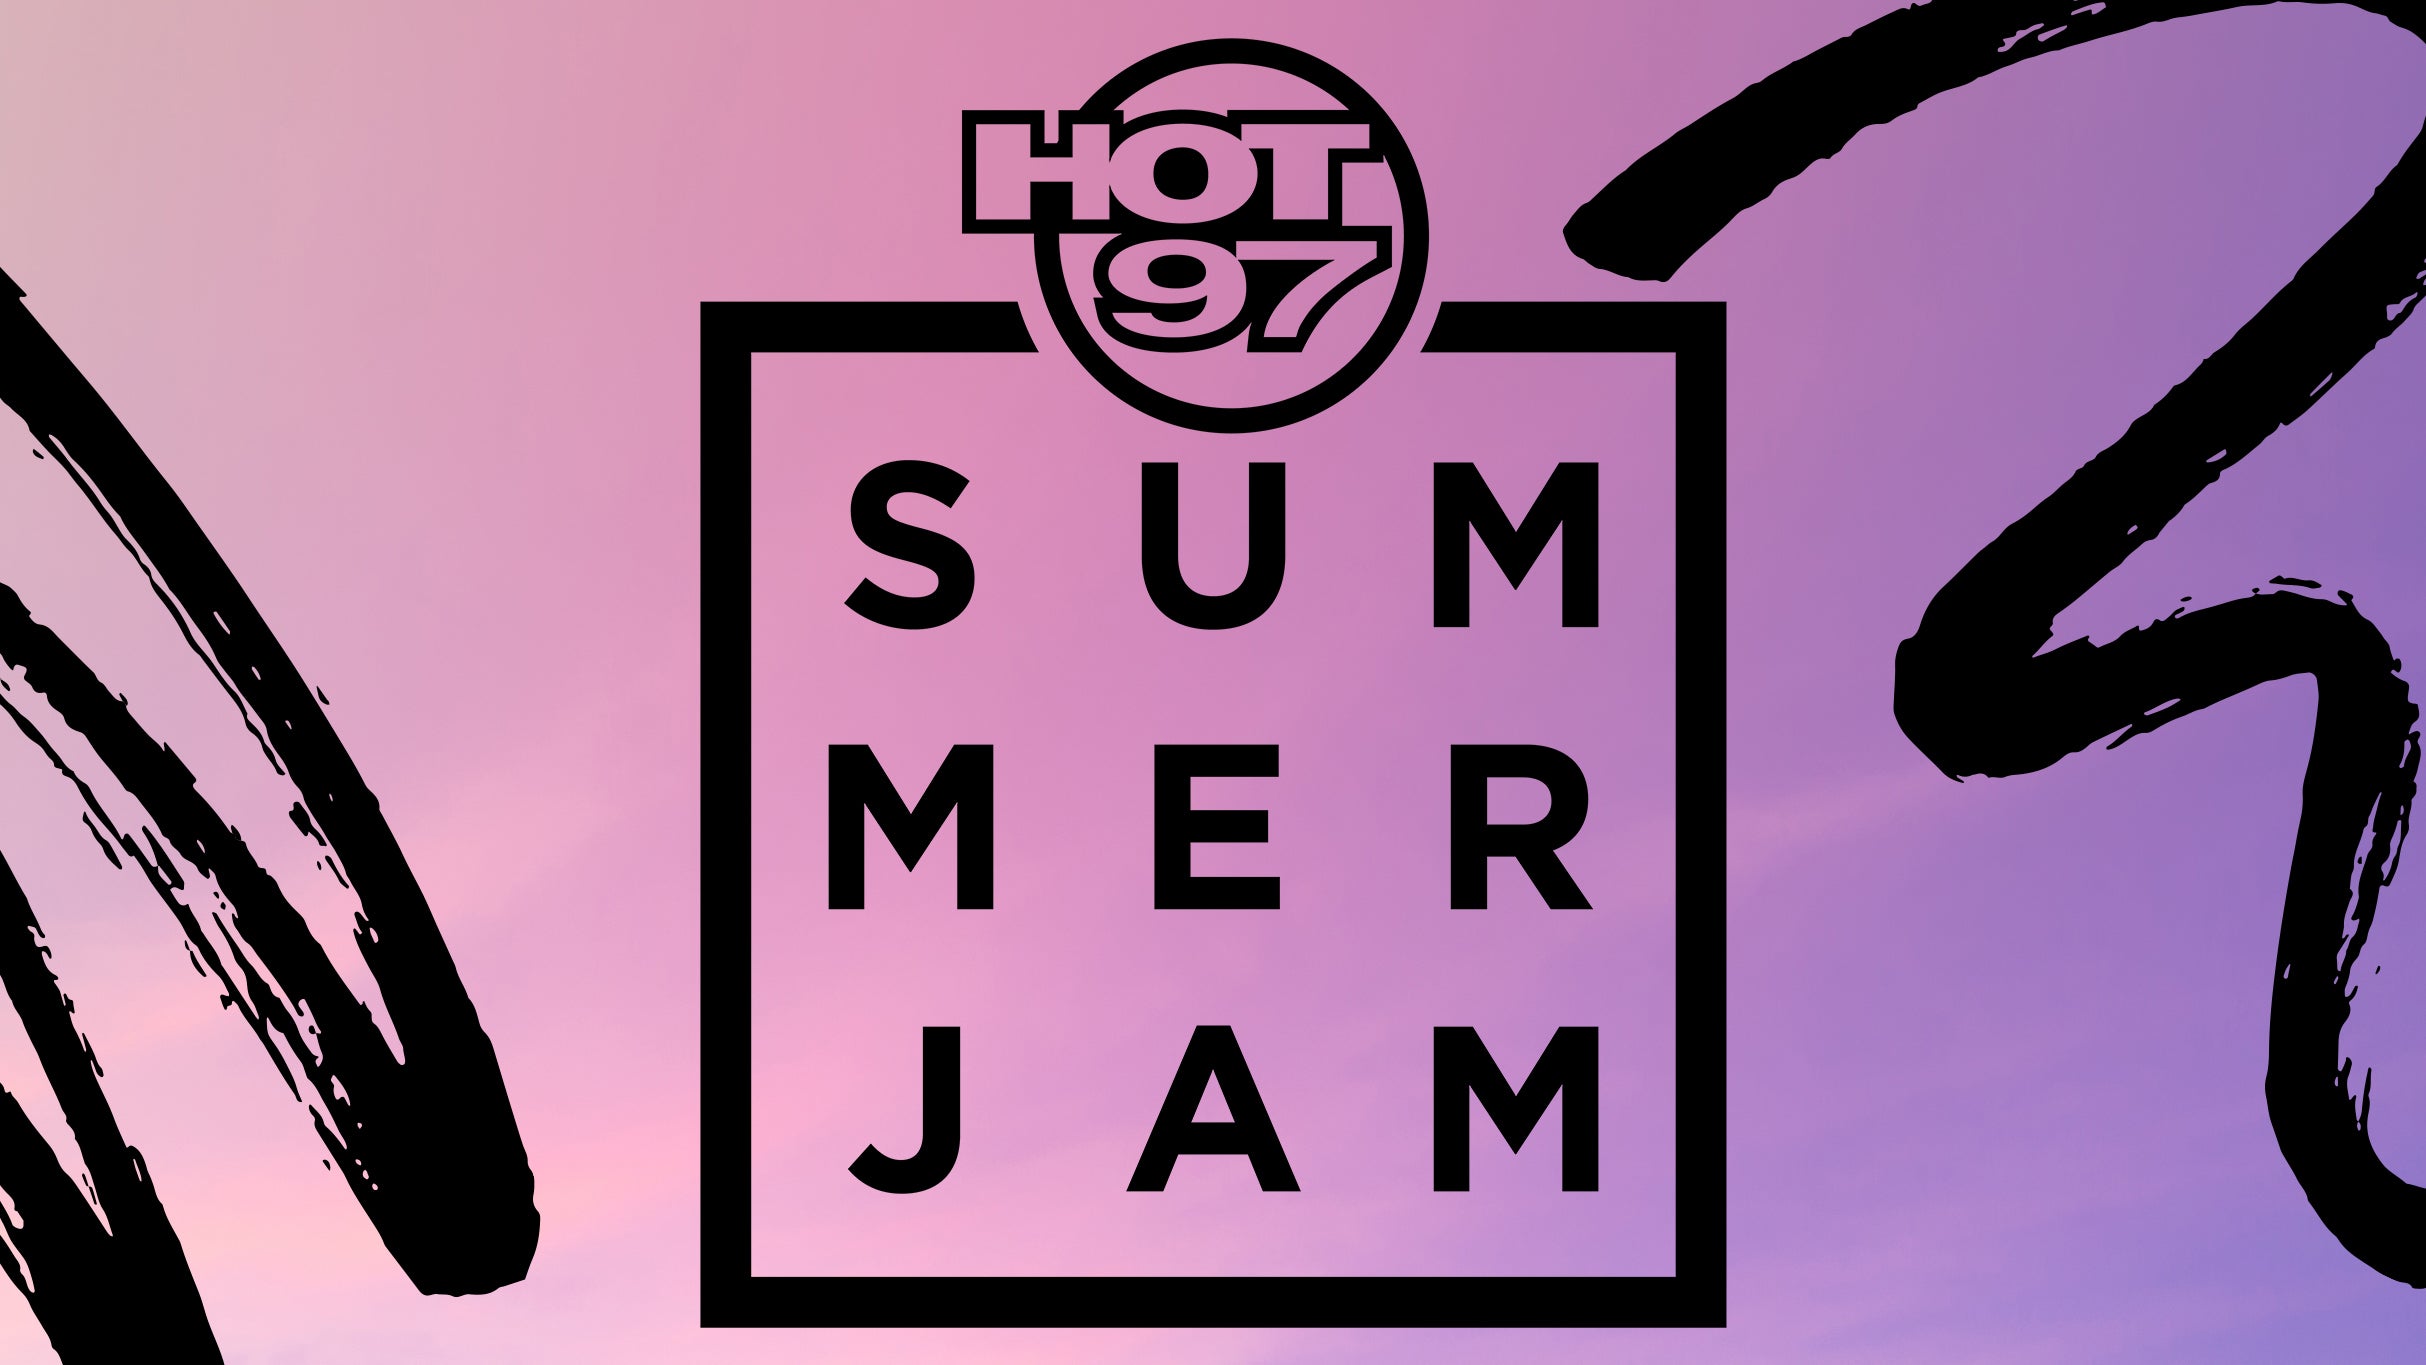 HOT 97 Summer Jam in Belmont Park - Long Island promo photo for American Express® Early Access presale offer code